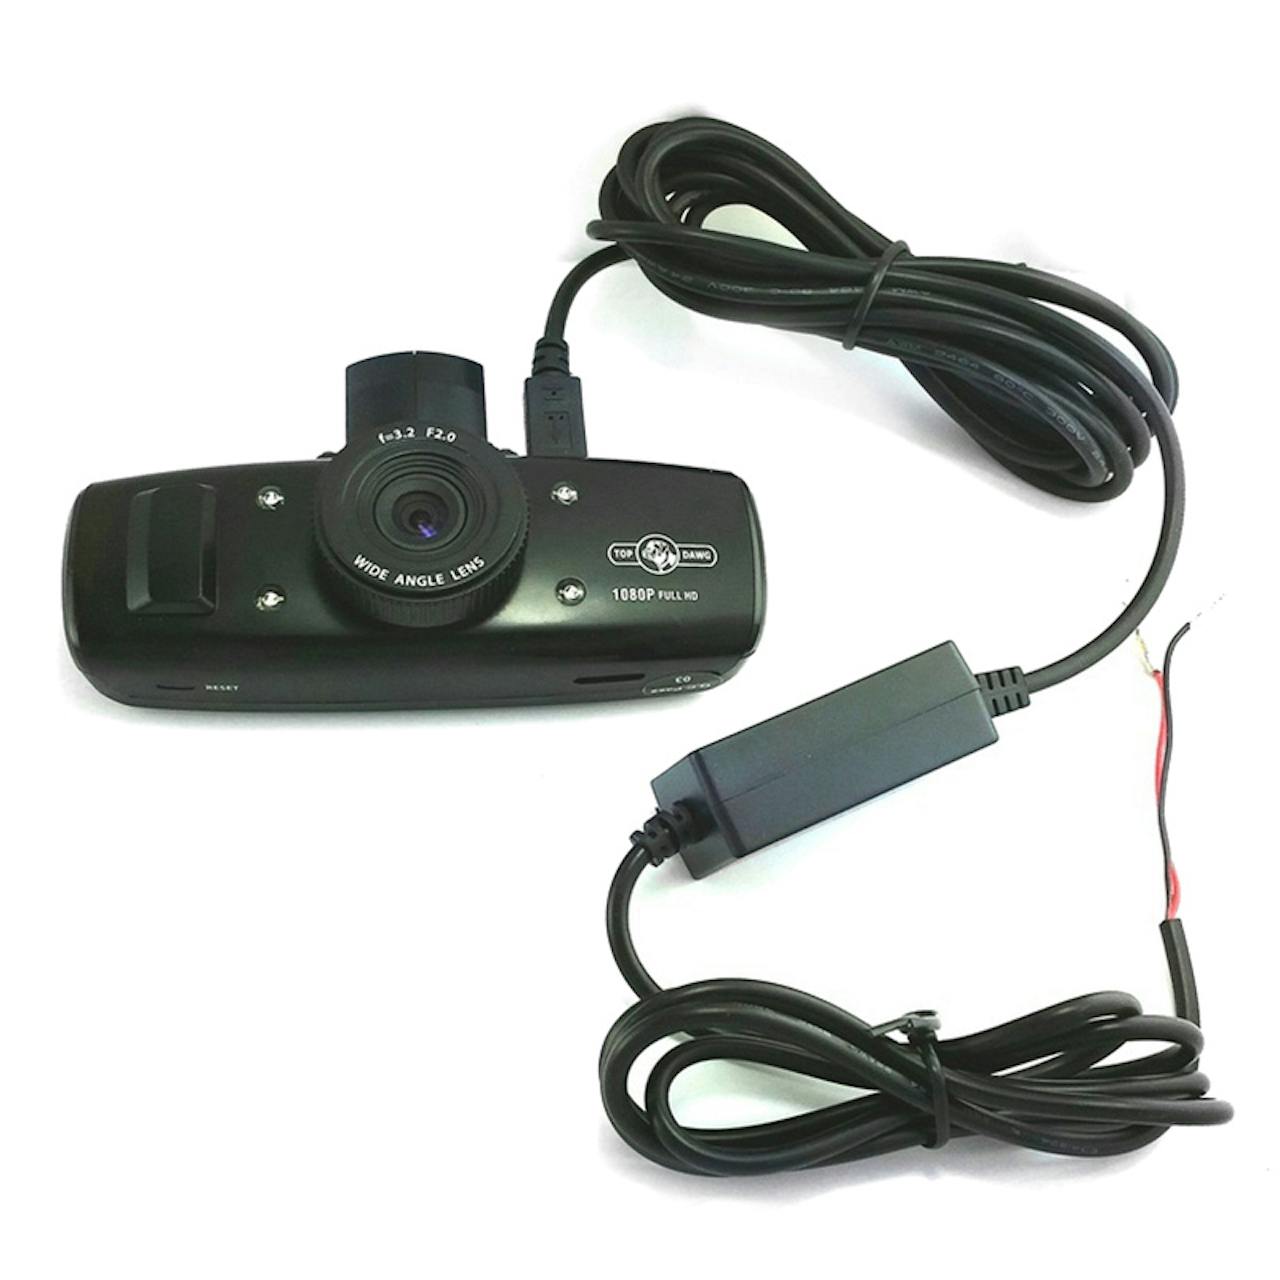 USB-C 12V Hard Wire Power Cable for Pinnacle Dash Cam